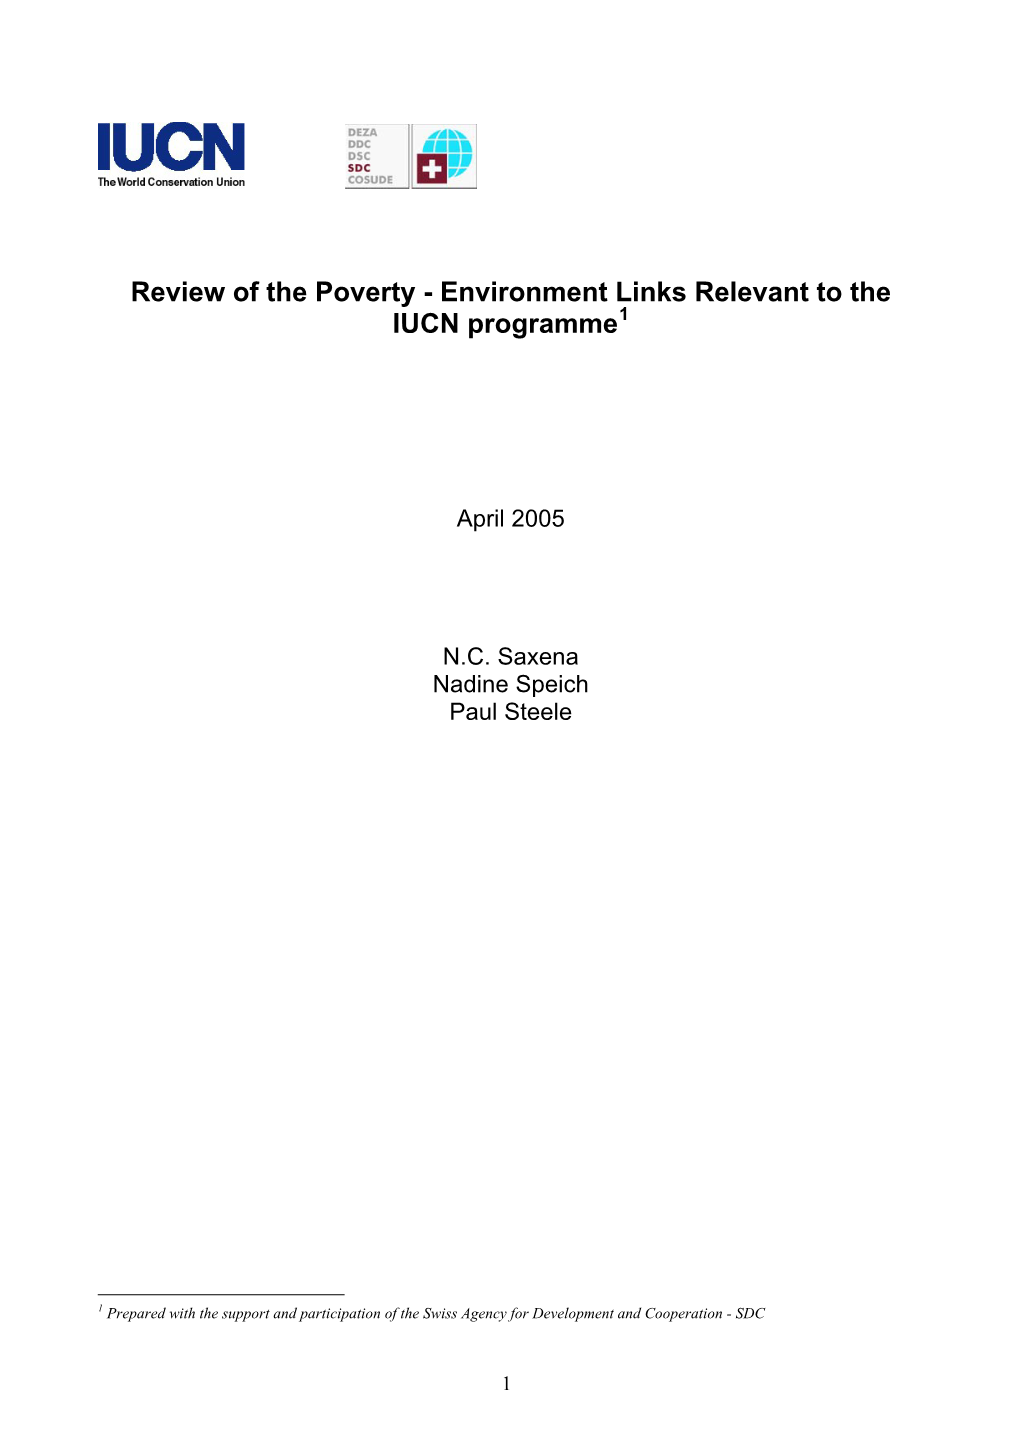 Poverty and Environment in IUCN